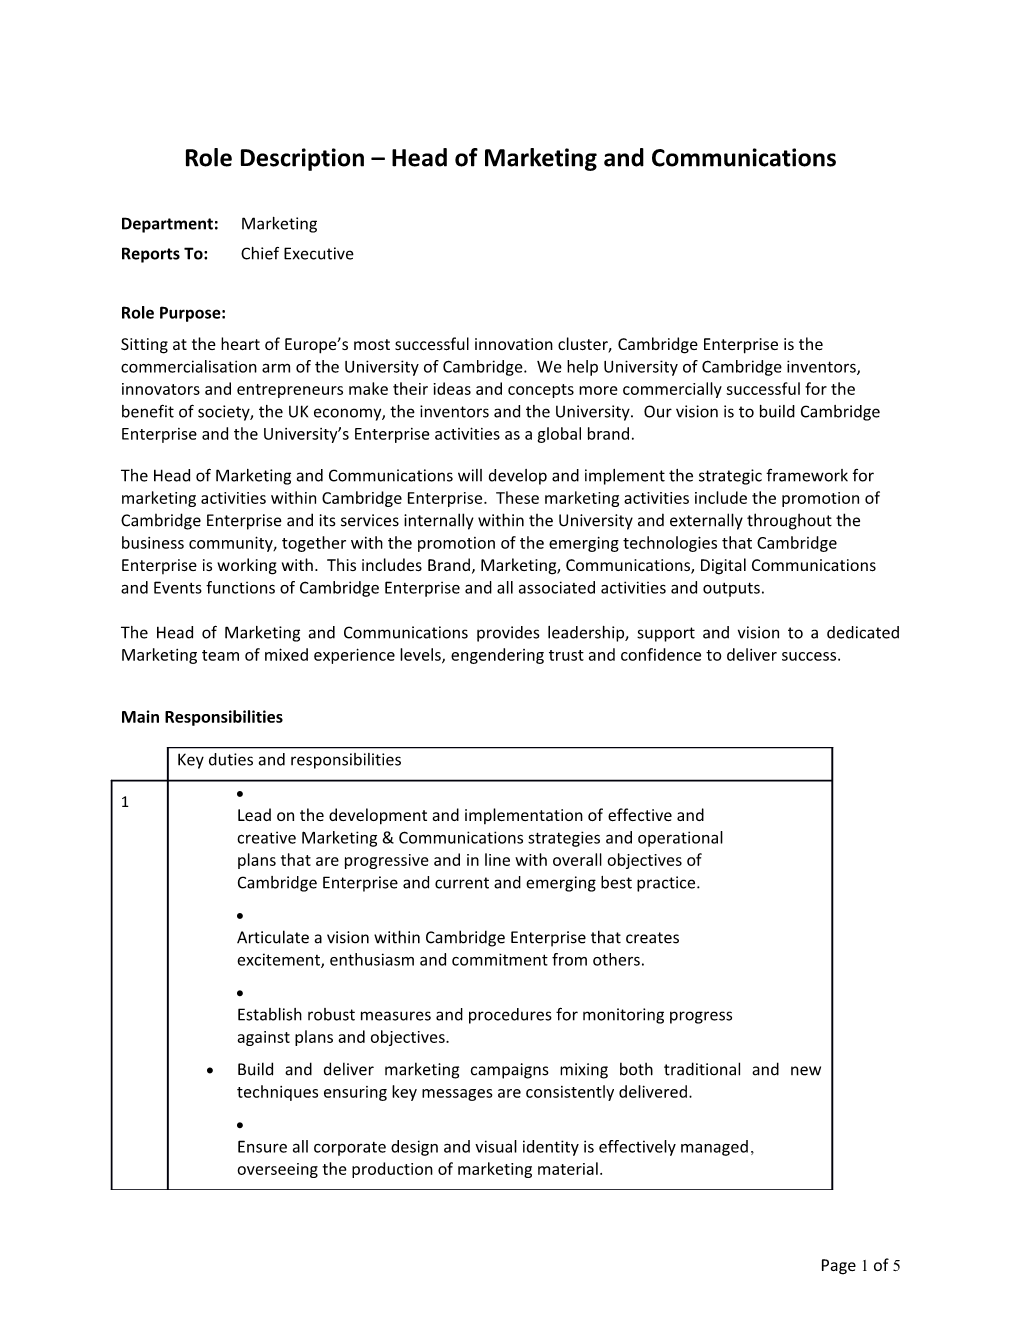 Role Description Head of Marketing and Communications